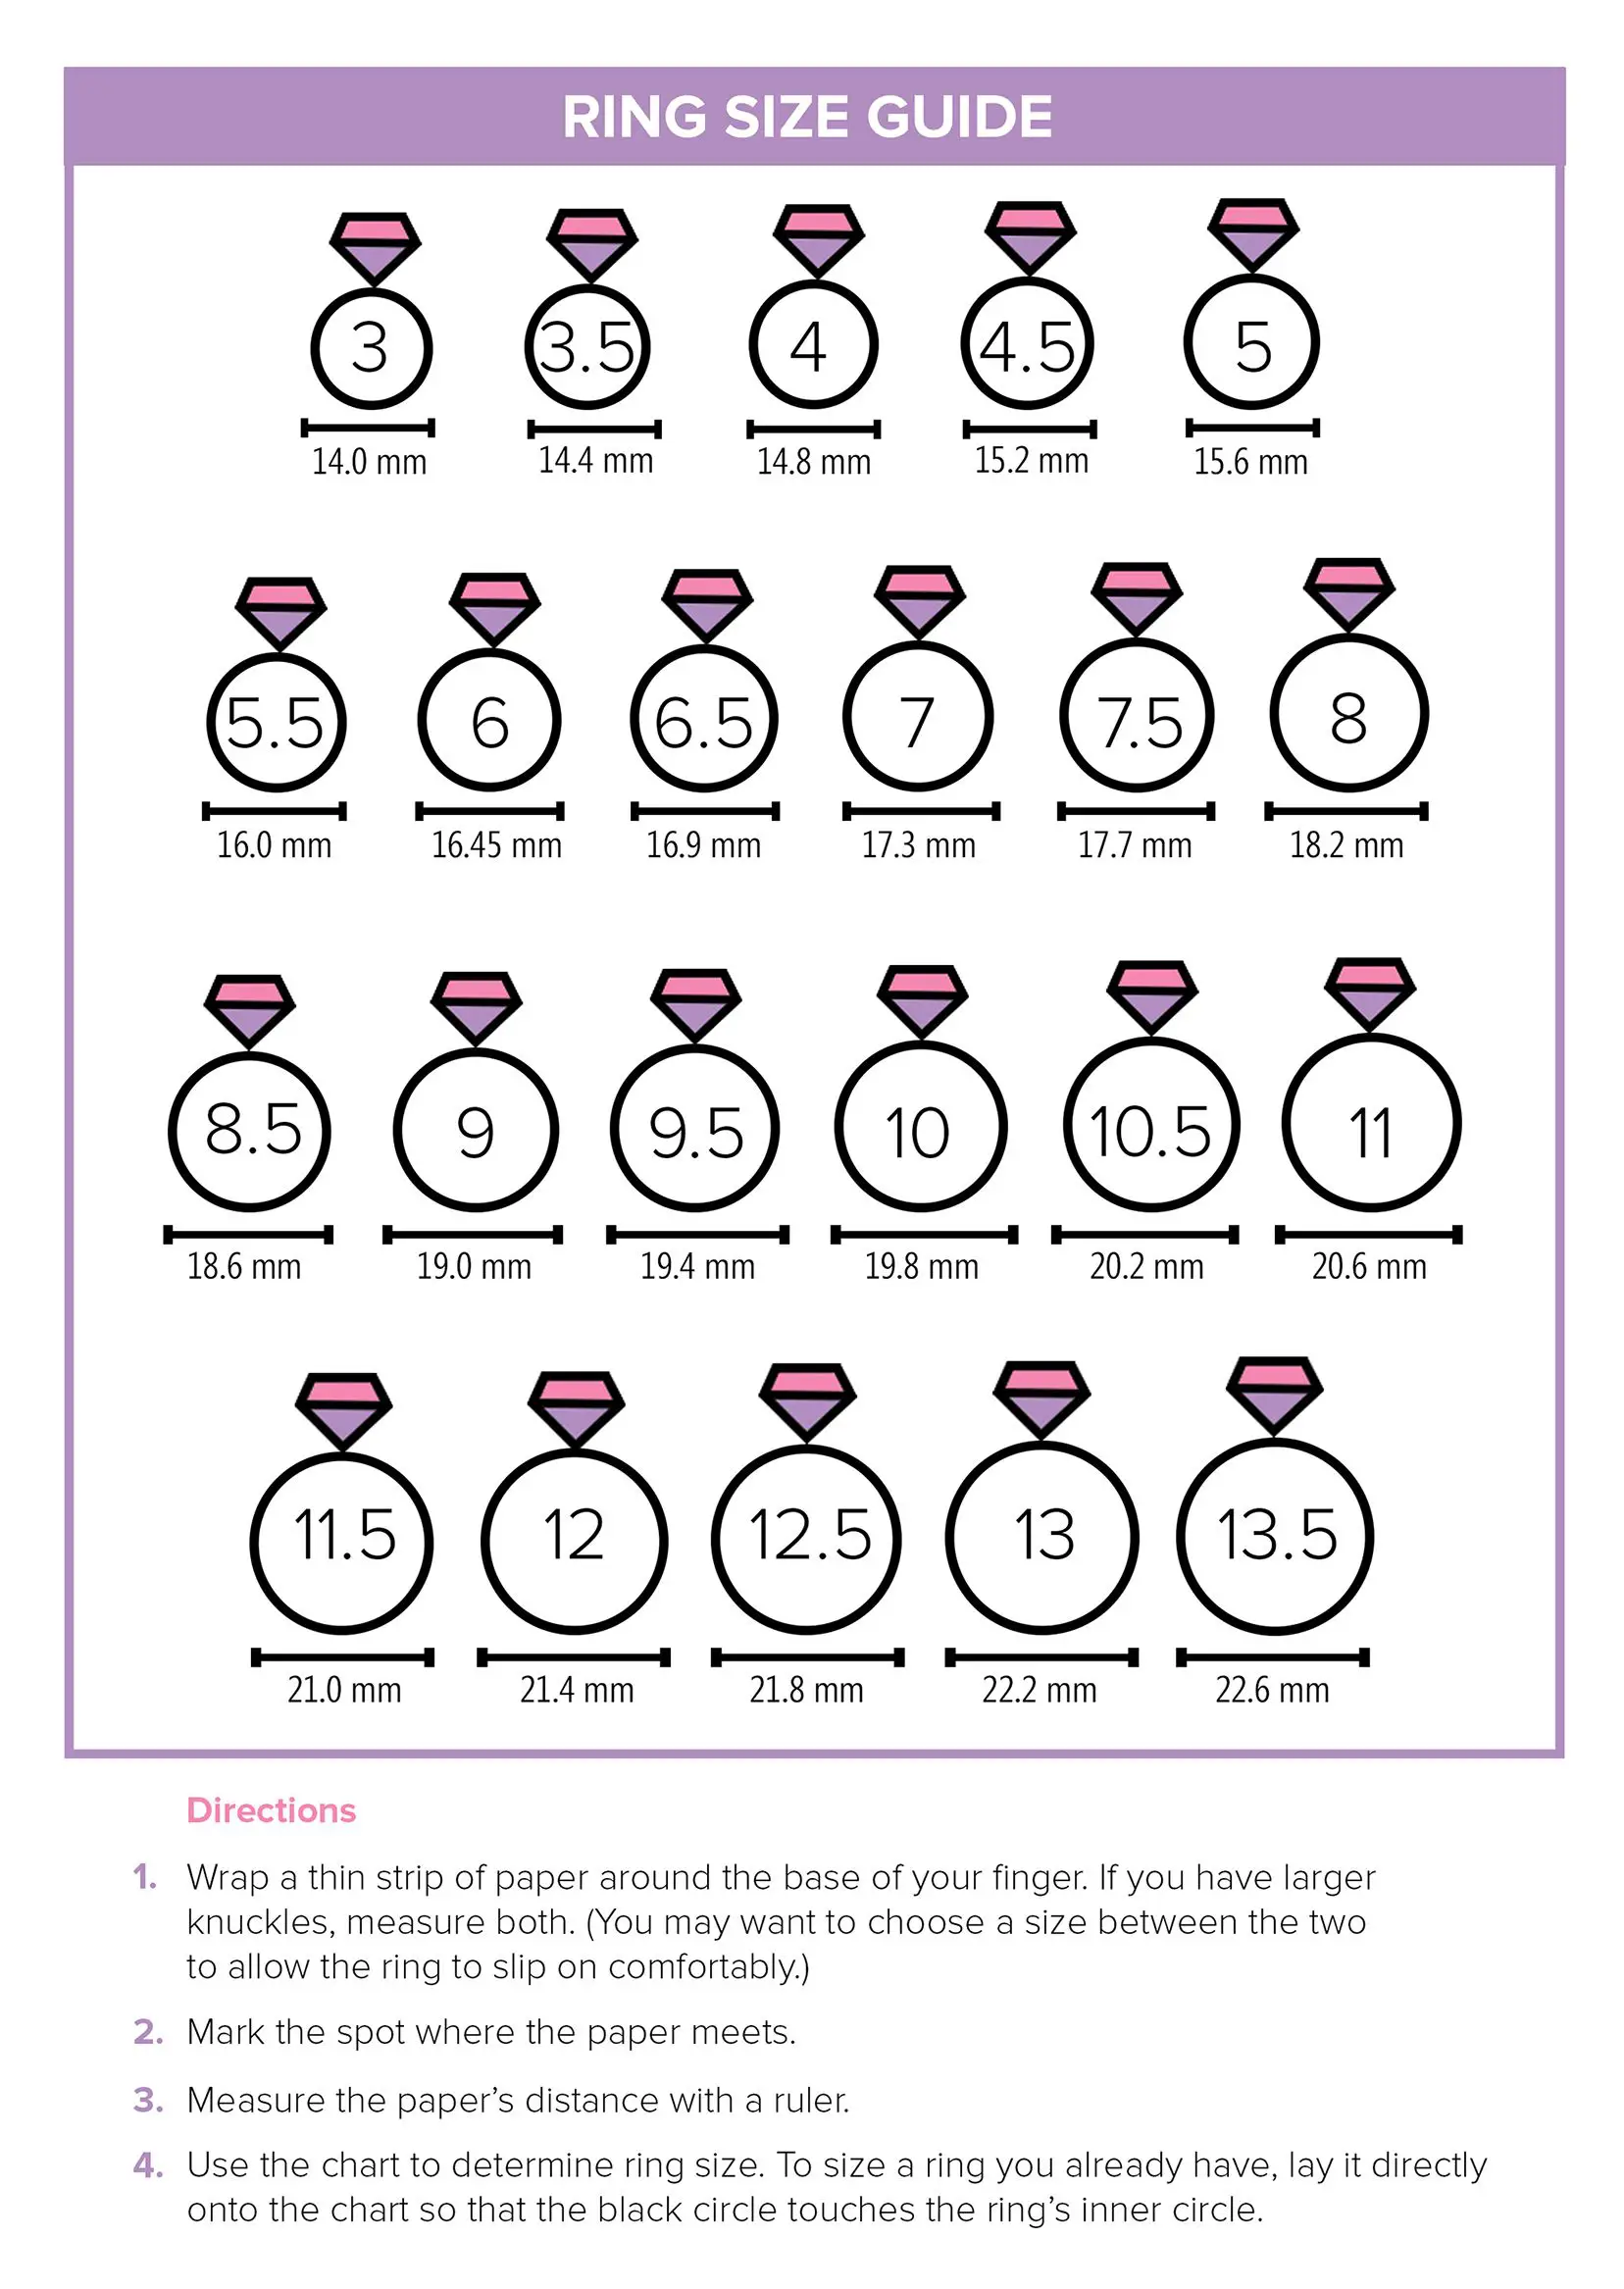 How to find your ring size at home using this handy chart